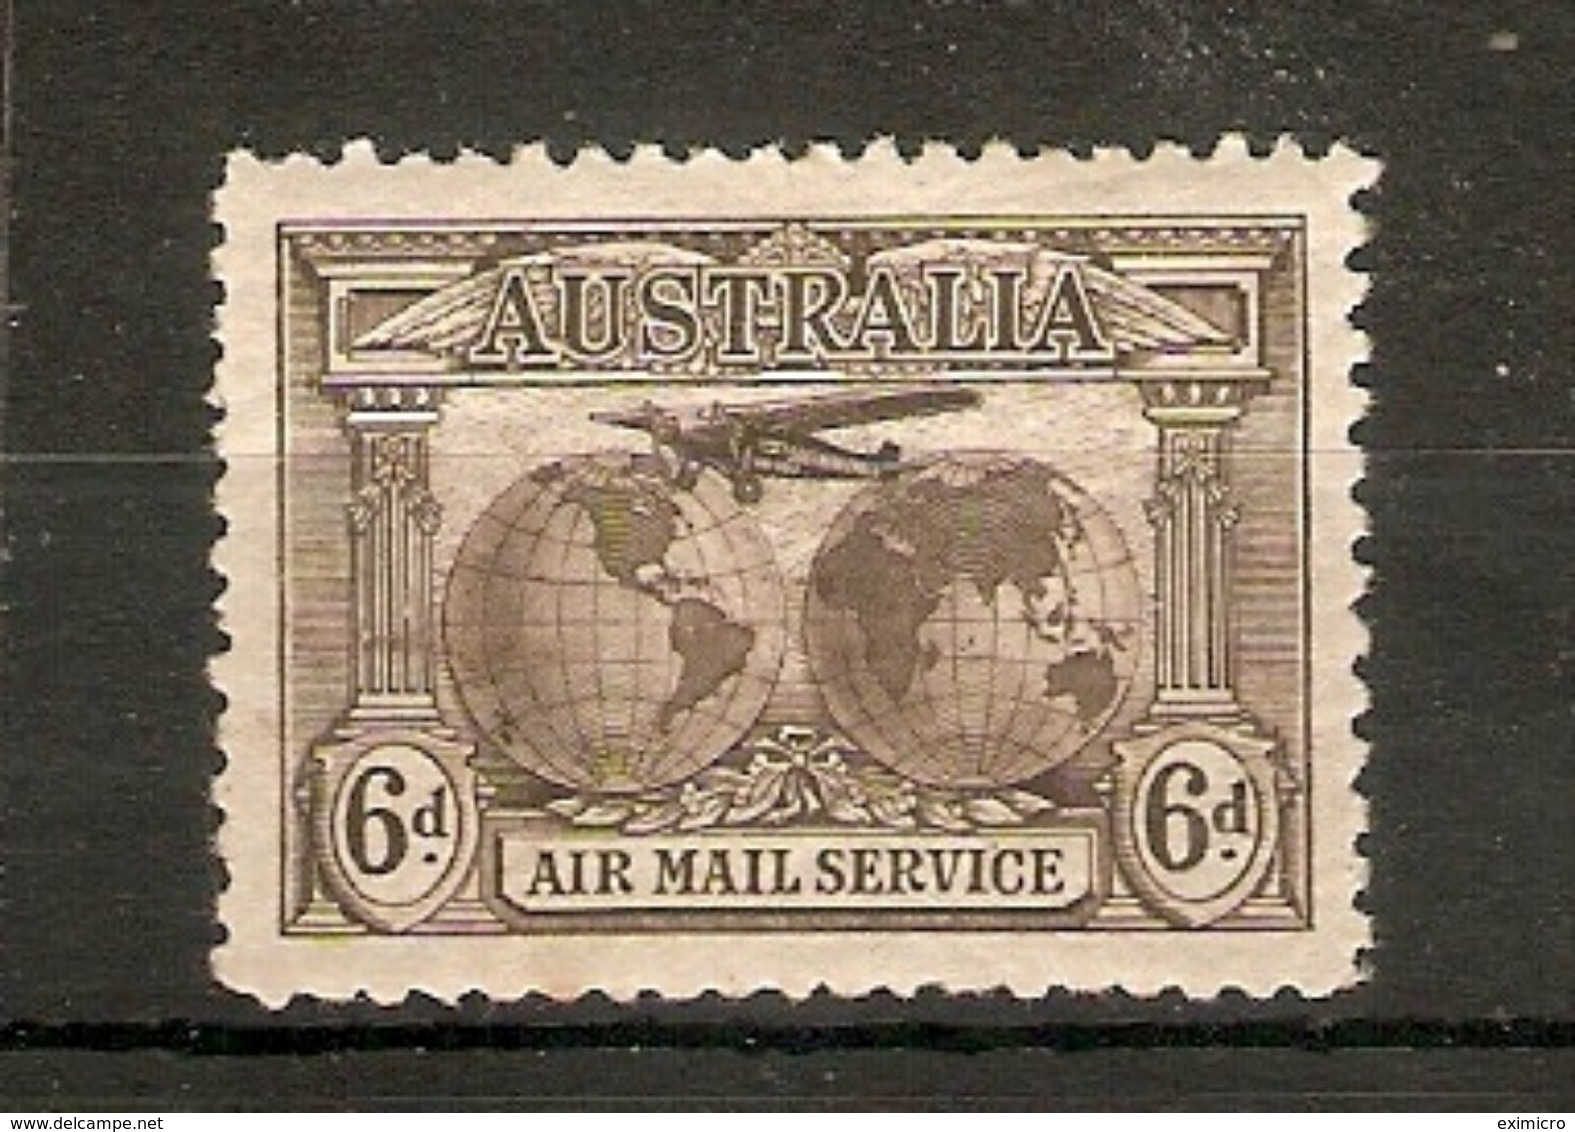 AUSTRALIA 1931 6d AIR SG 139 LIGHTLY MOUNTED MINT Cat £22 - Mint Stamps